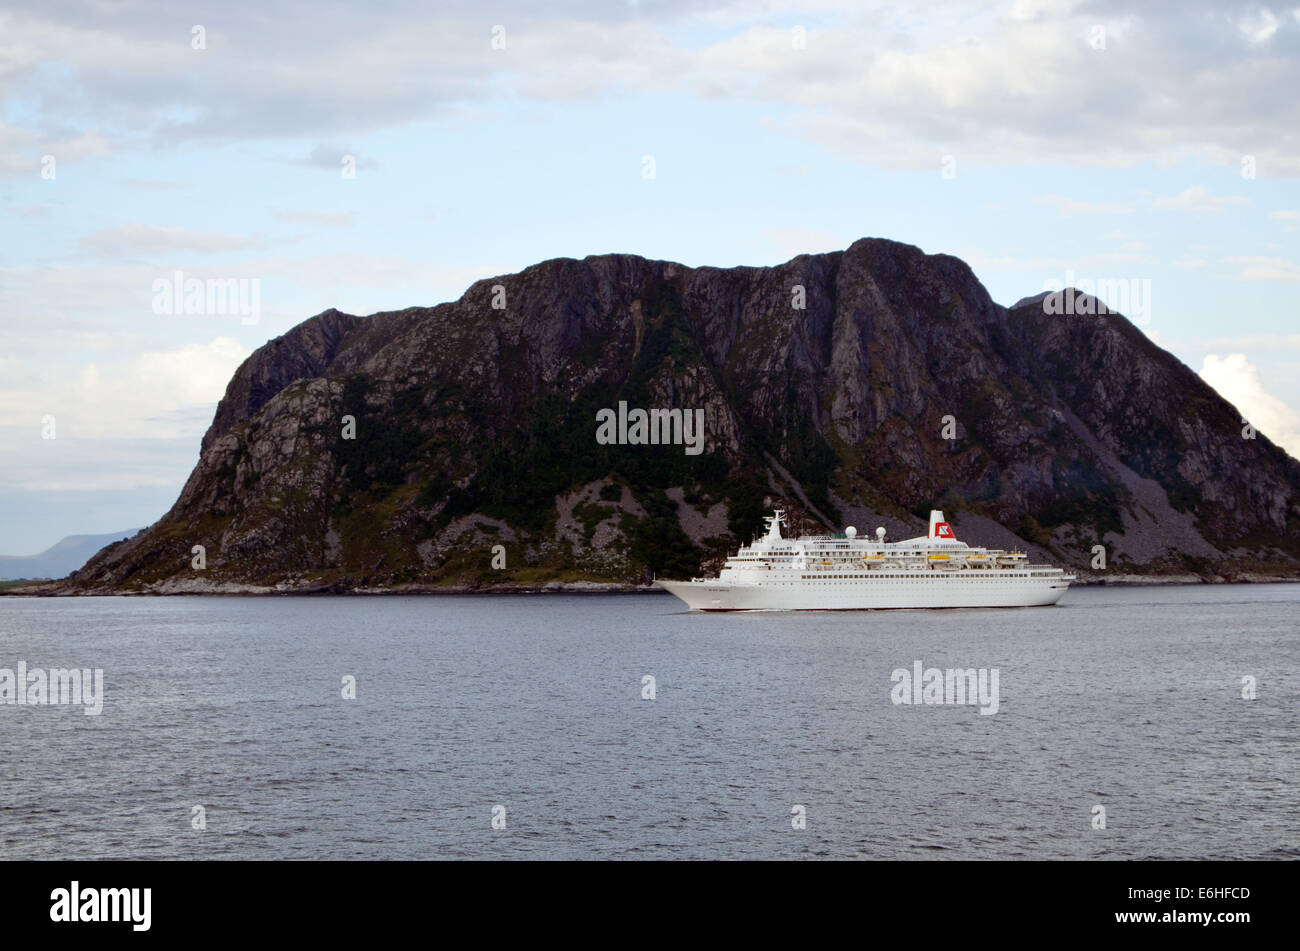 The boat continues down the Norwegian coast, steadily making its way south,past the small islands. Stock Photo